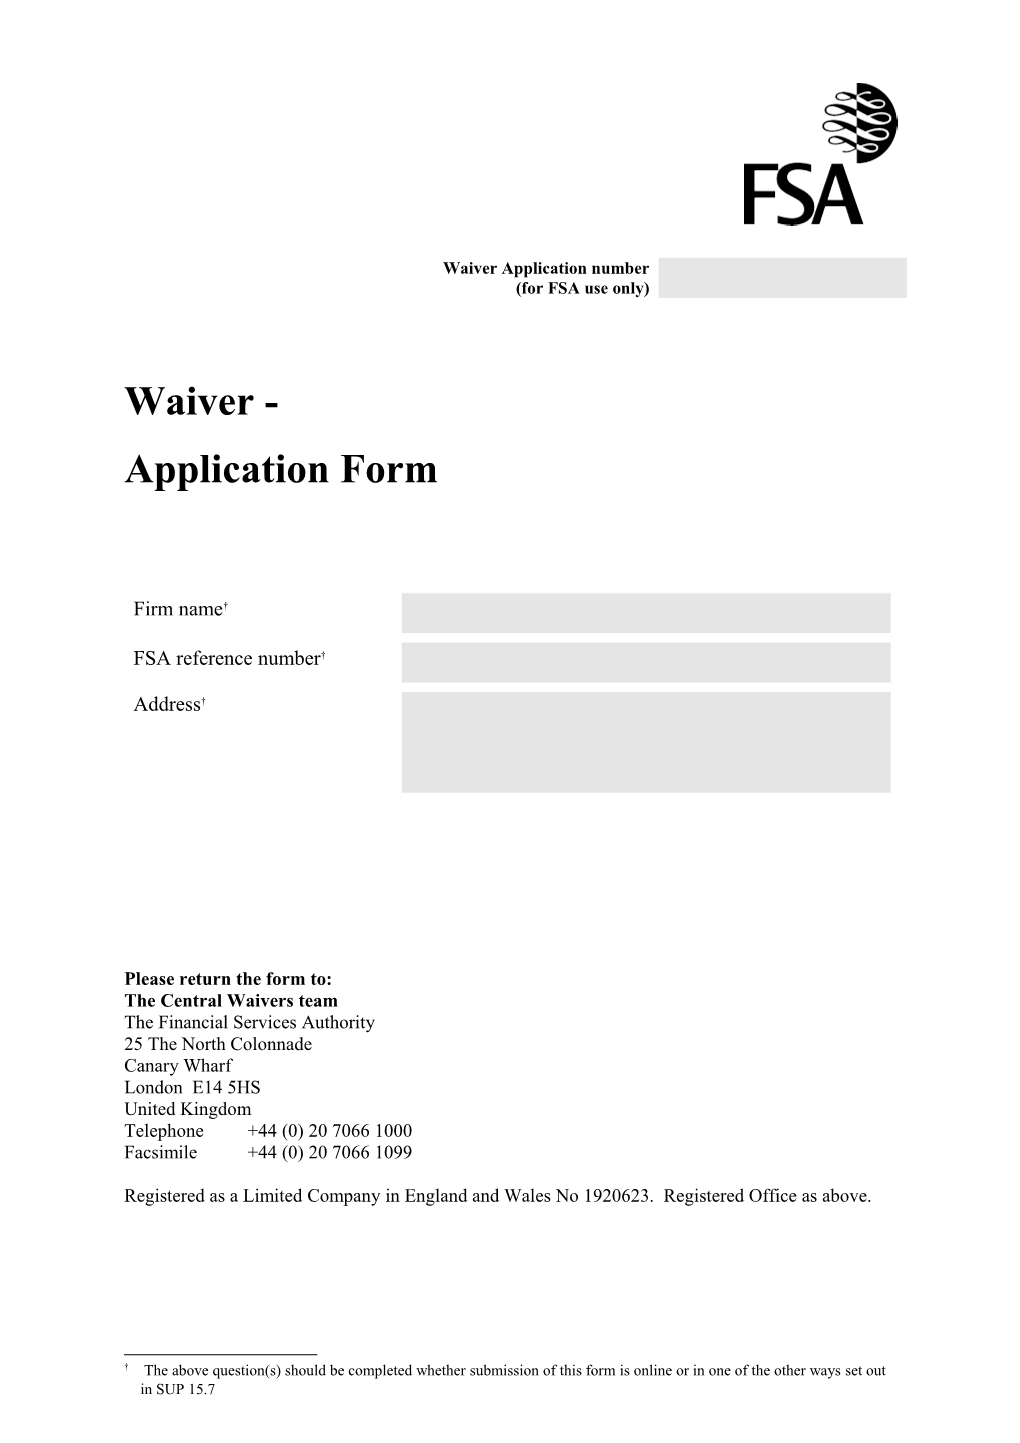 Waiver - Application Form